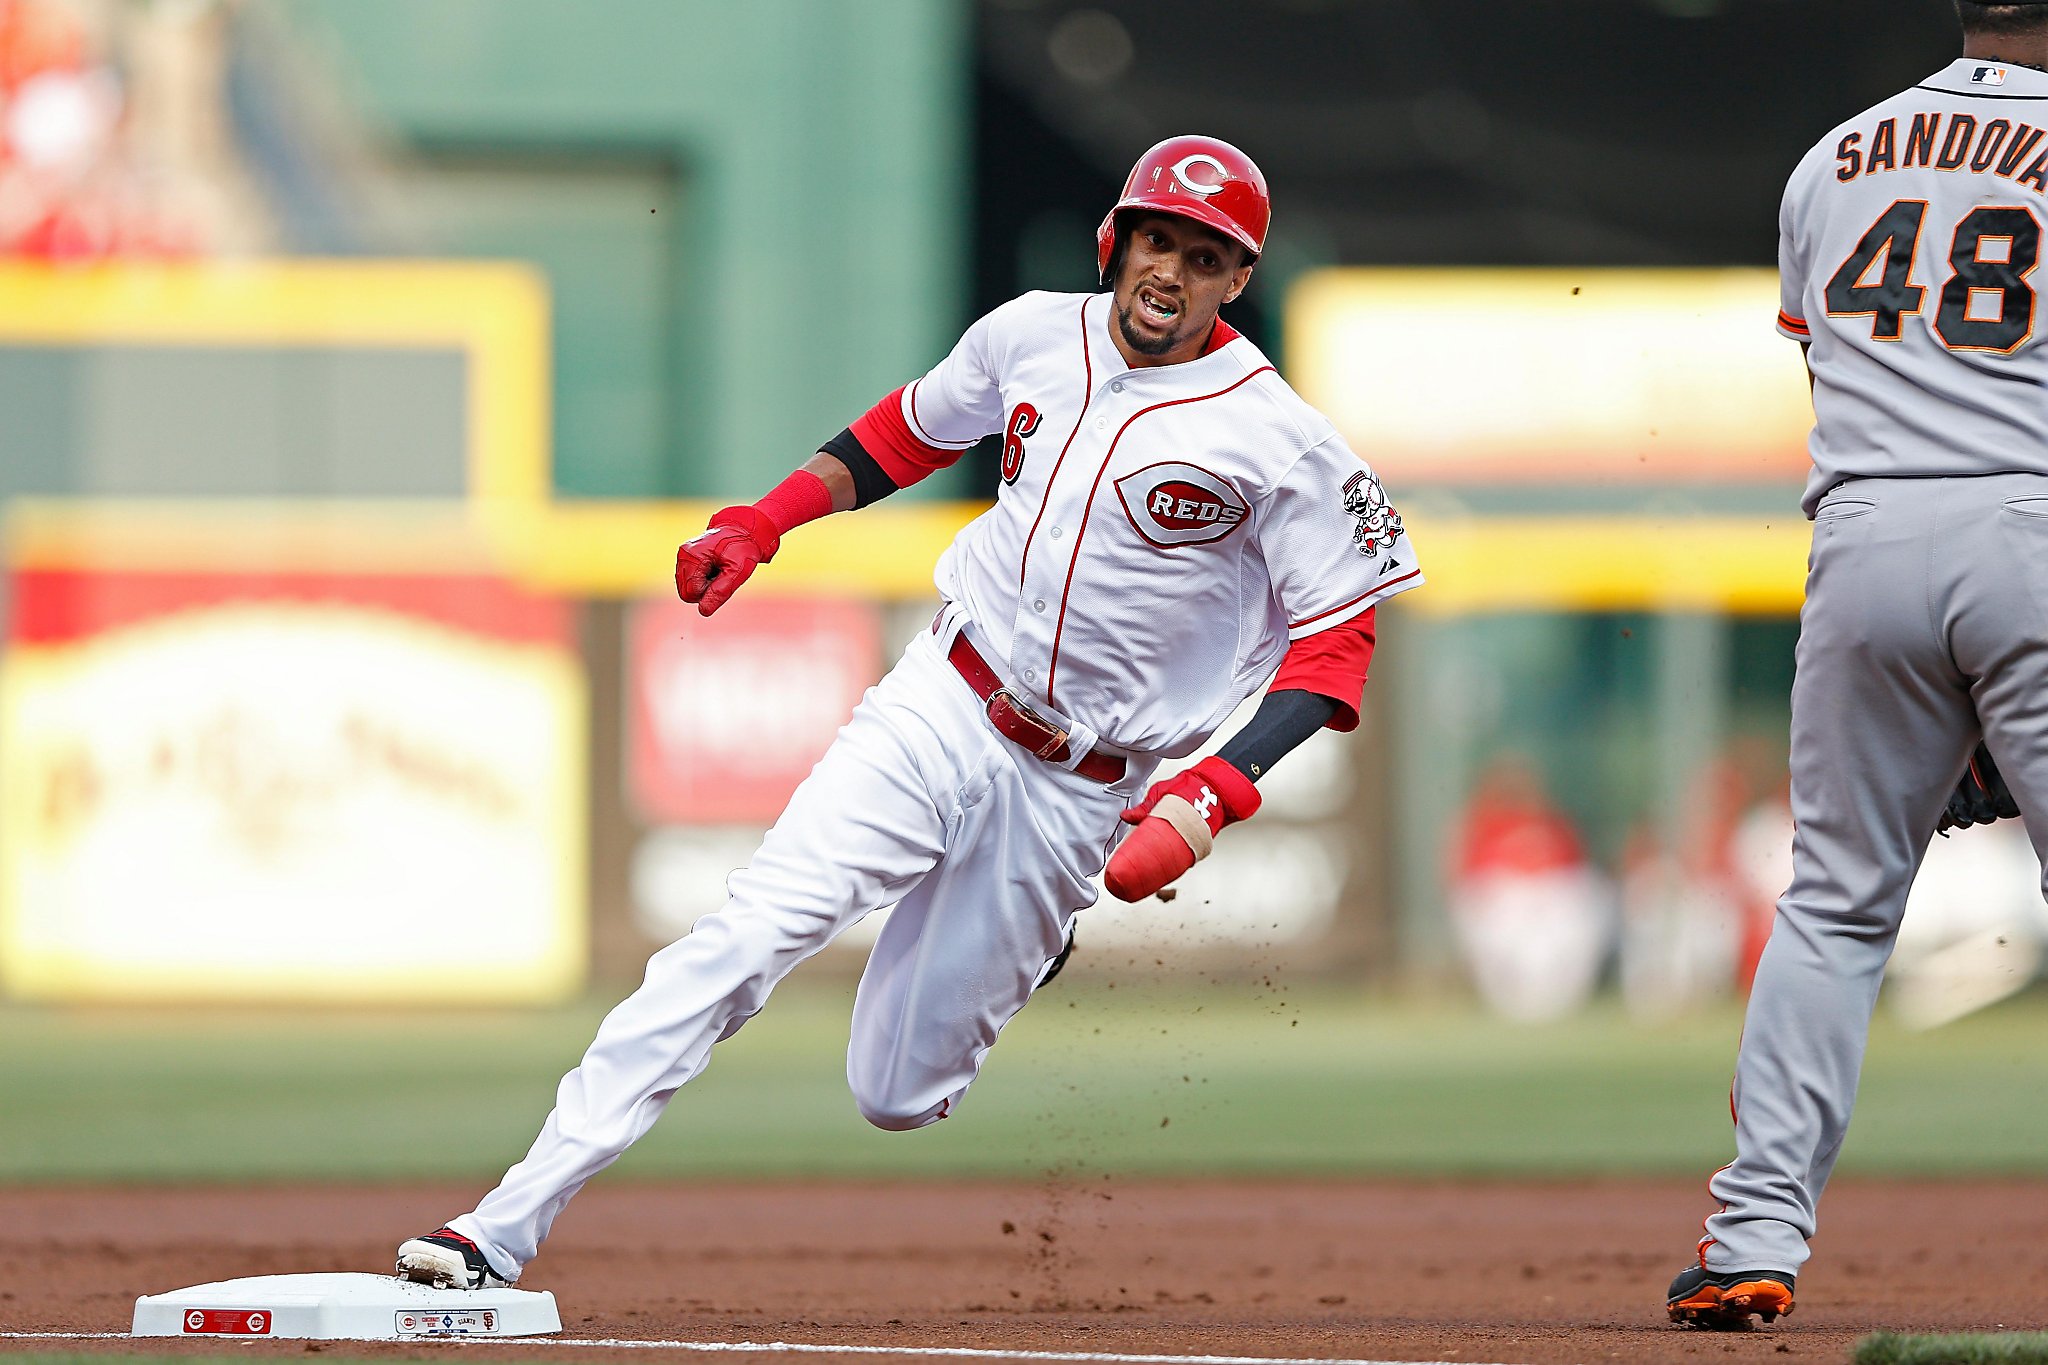 Giants trade speedster Billy Hamilton to Mets for pitching prospect